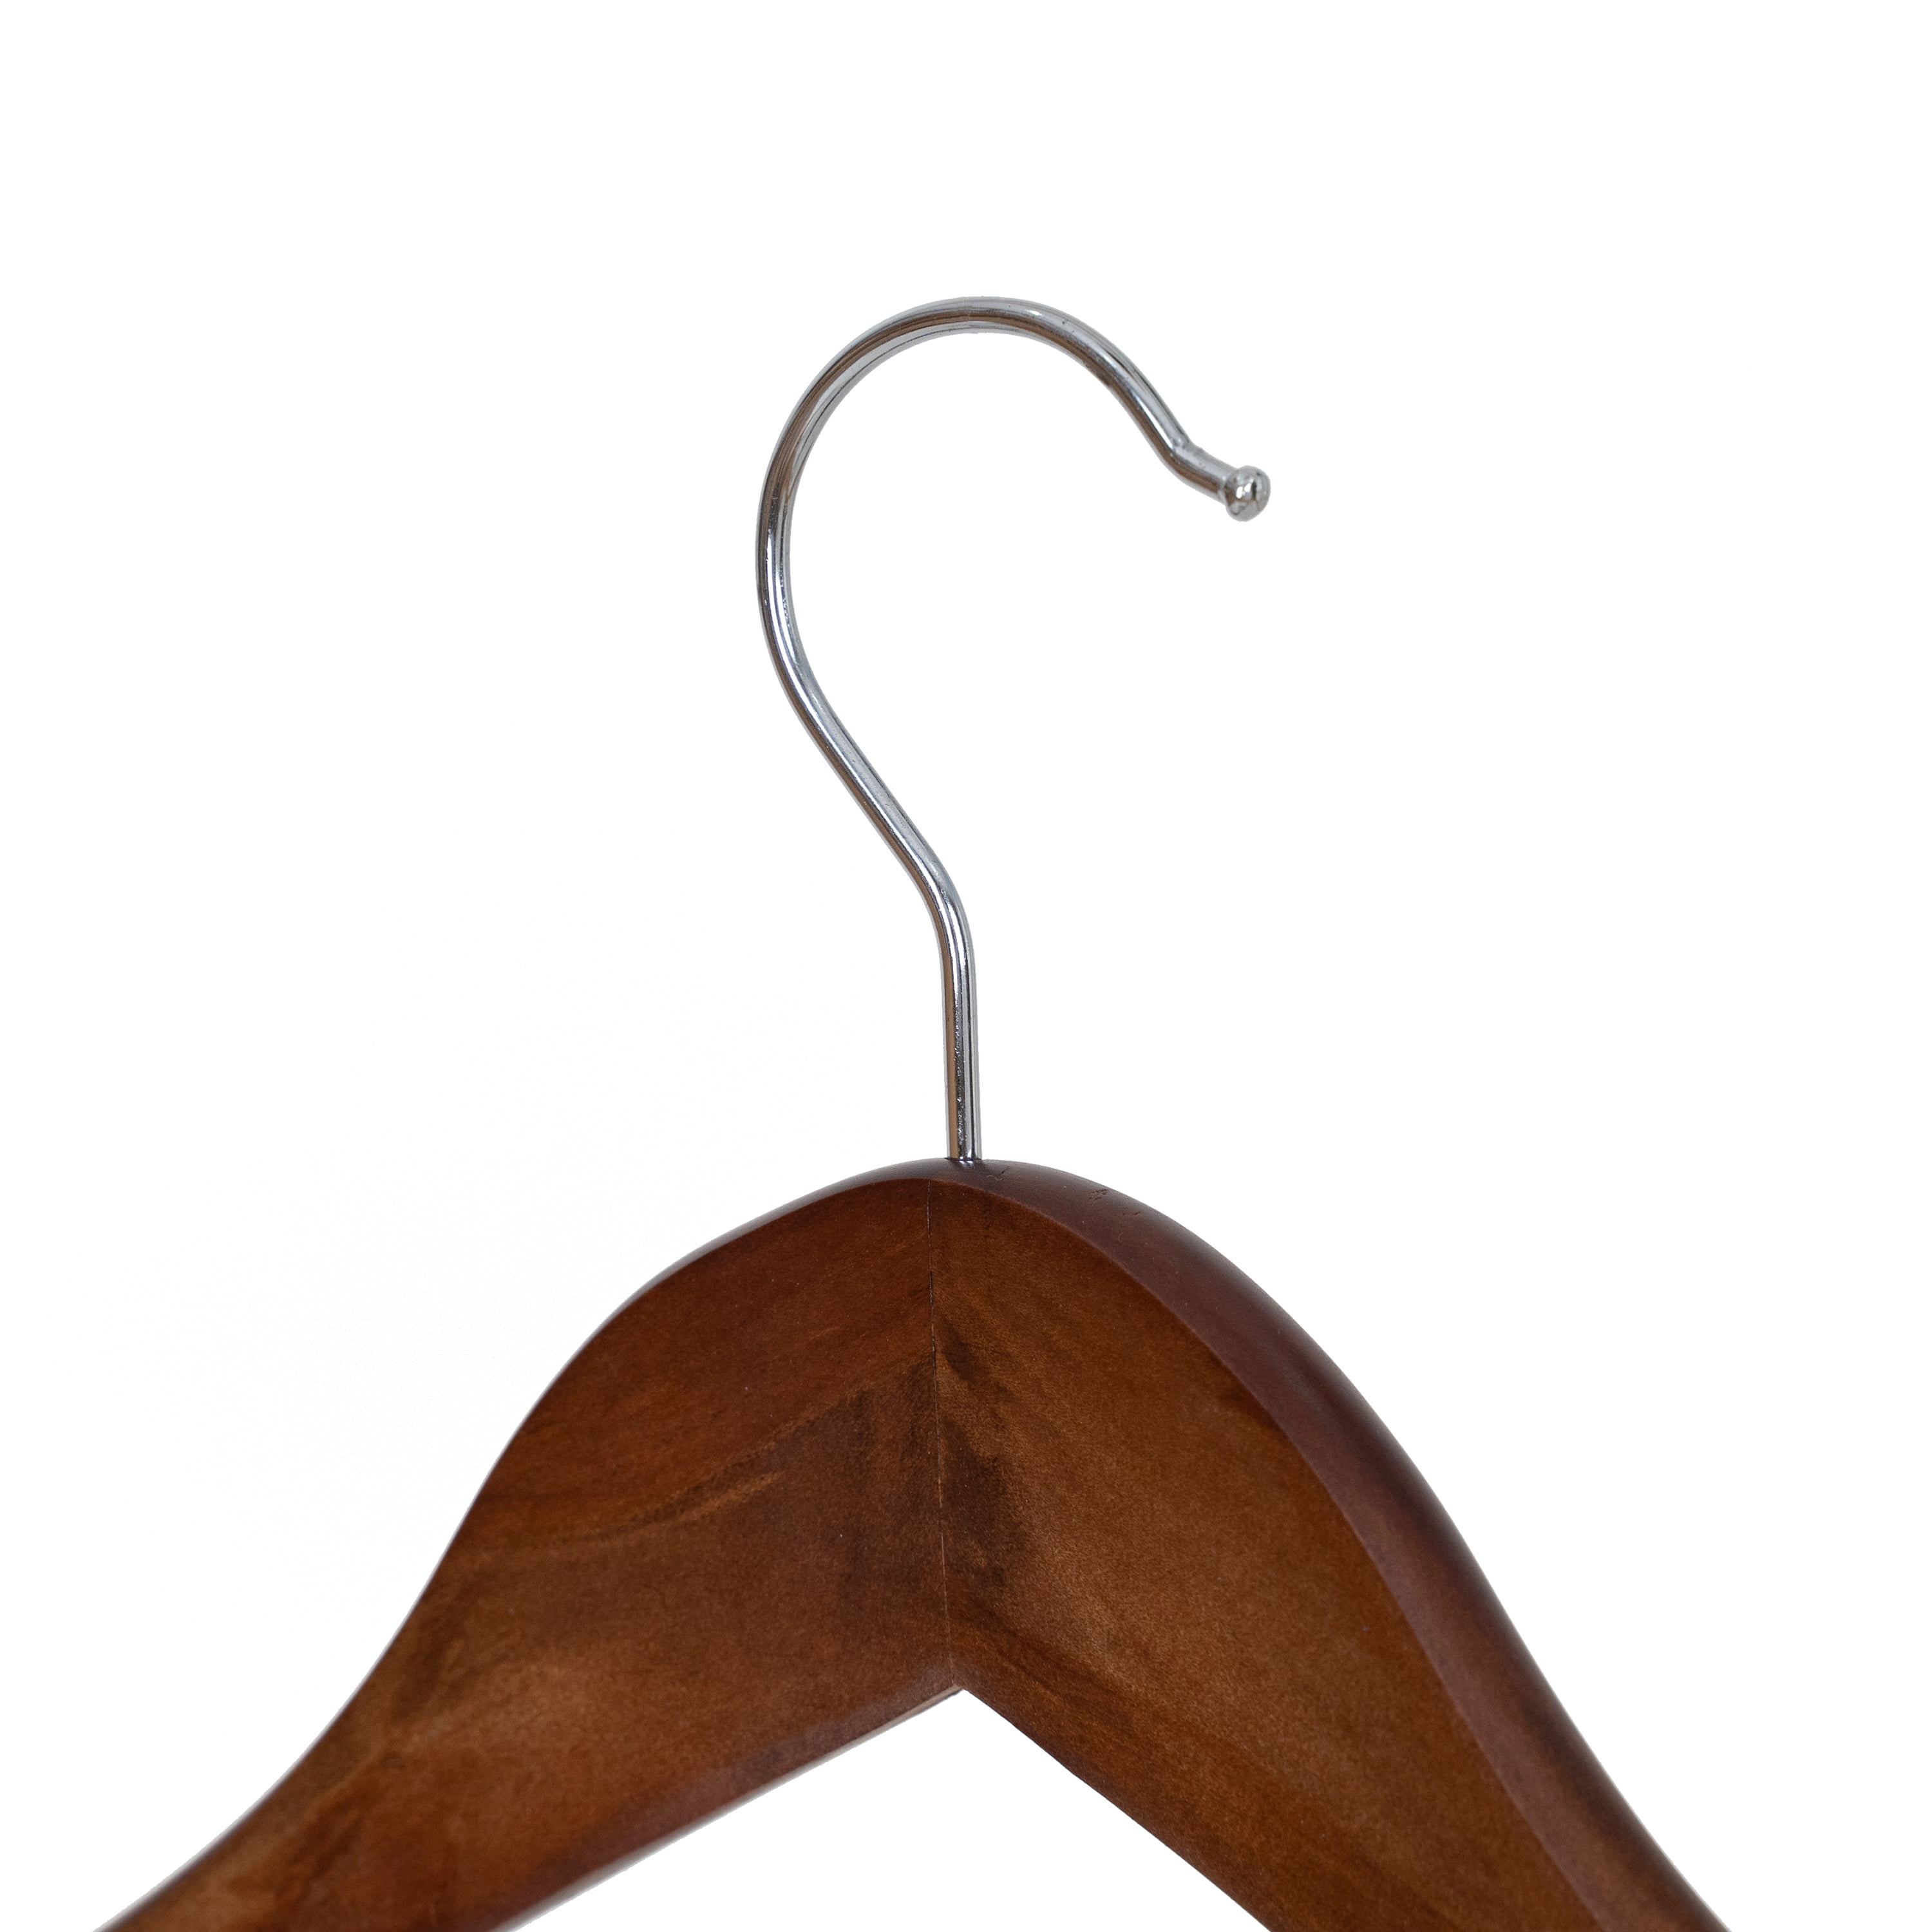 Walnut Finish Notched Wooden Suit Hanger with Non-Slip Bar (Case of 25) 200523-025